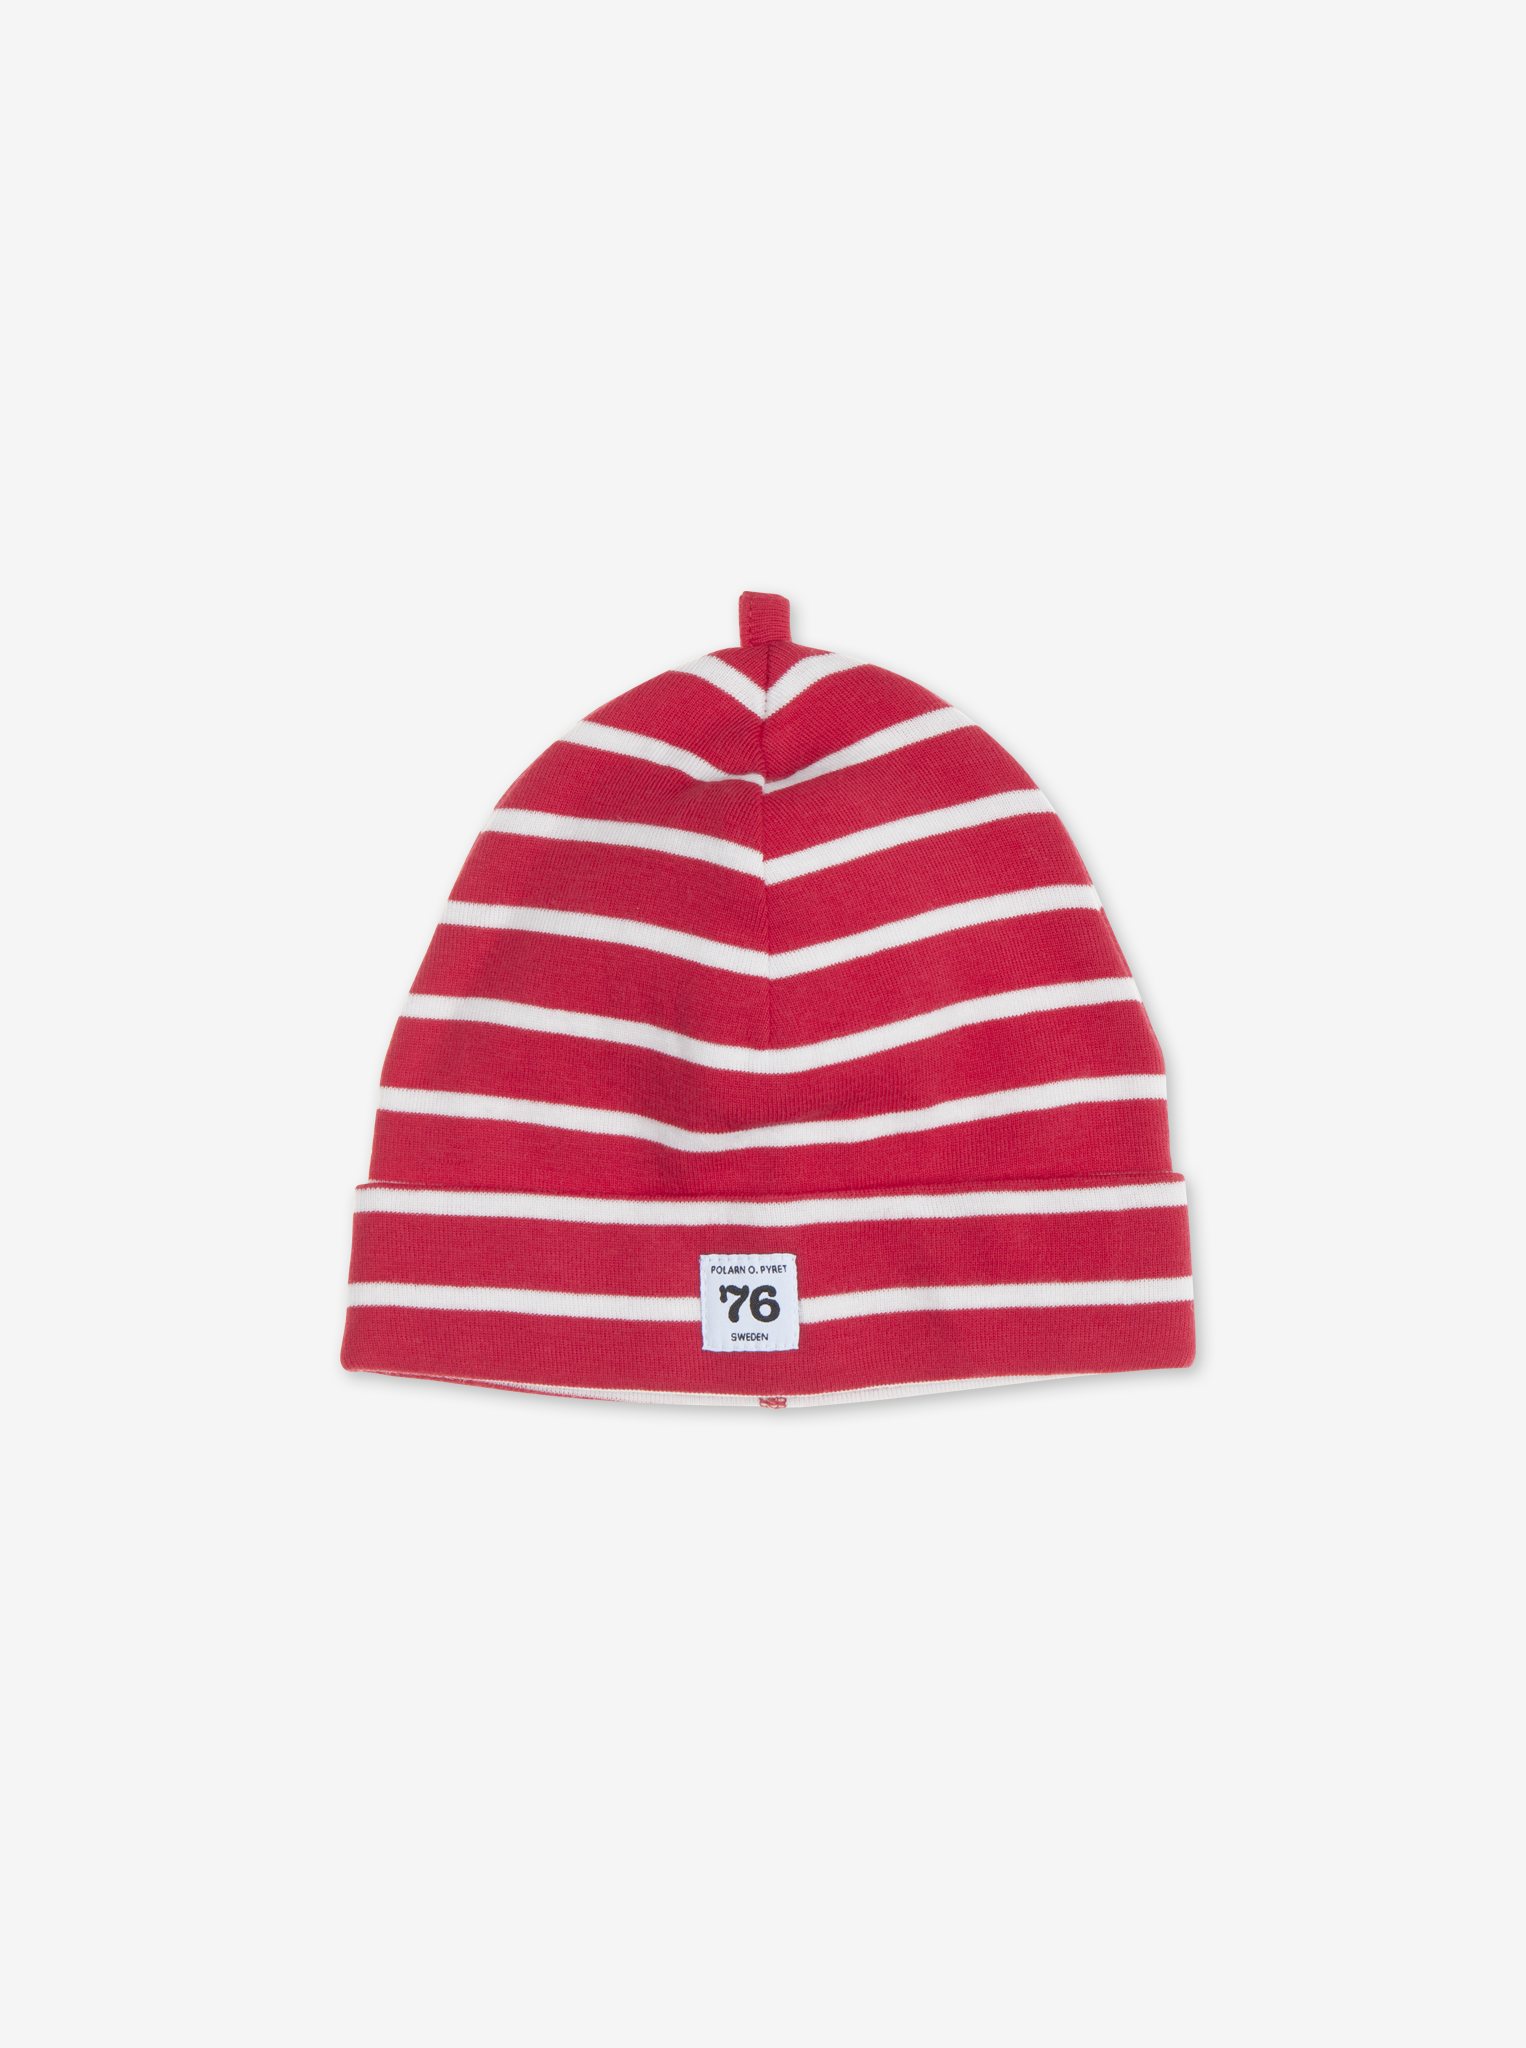 kids red and white stripes organic cotton hat, high quality comfortable polarn o. pyret childrens